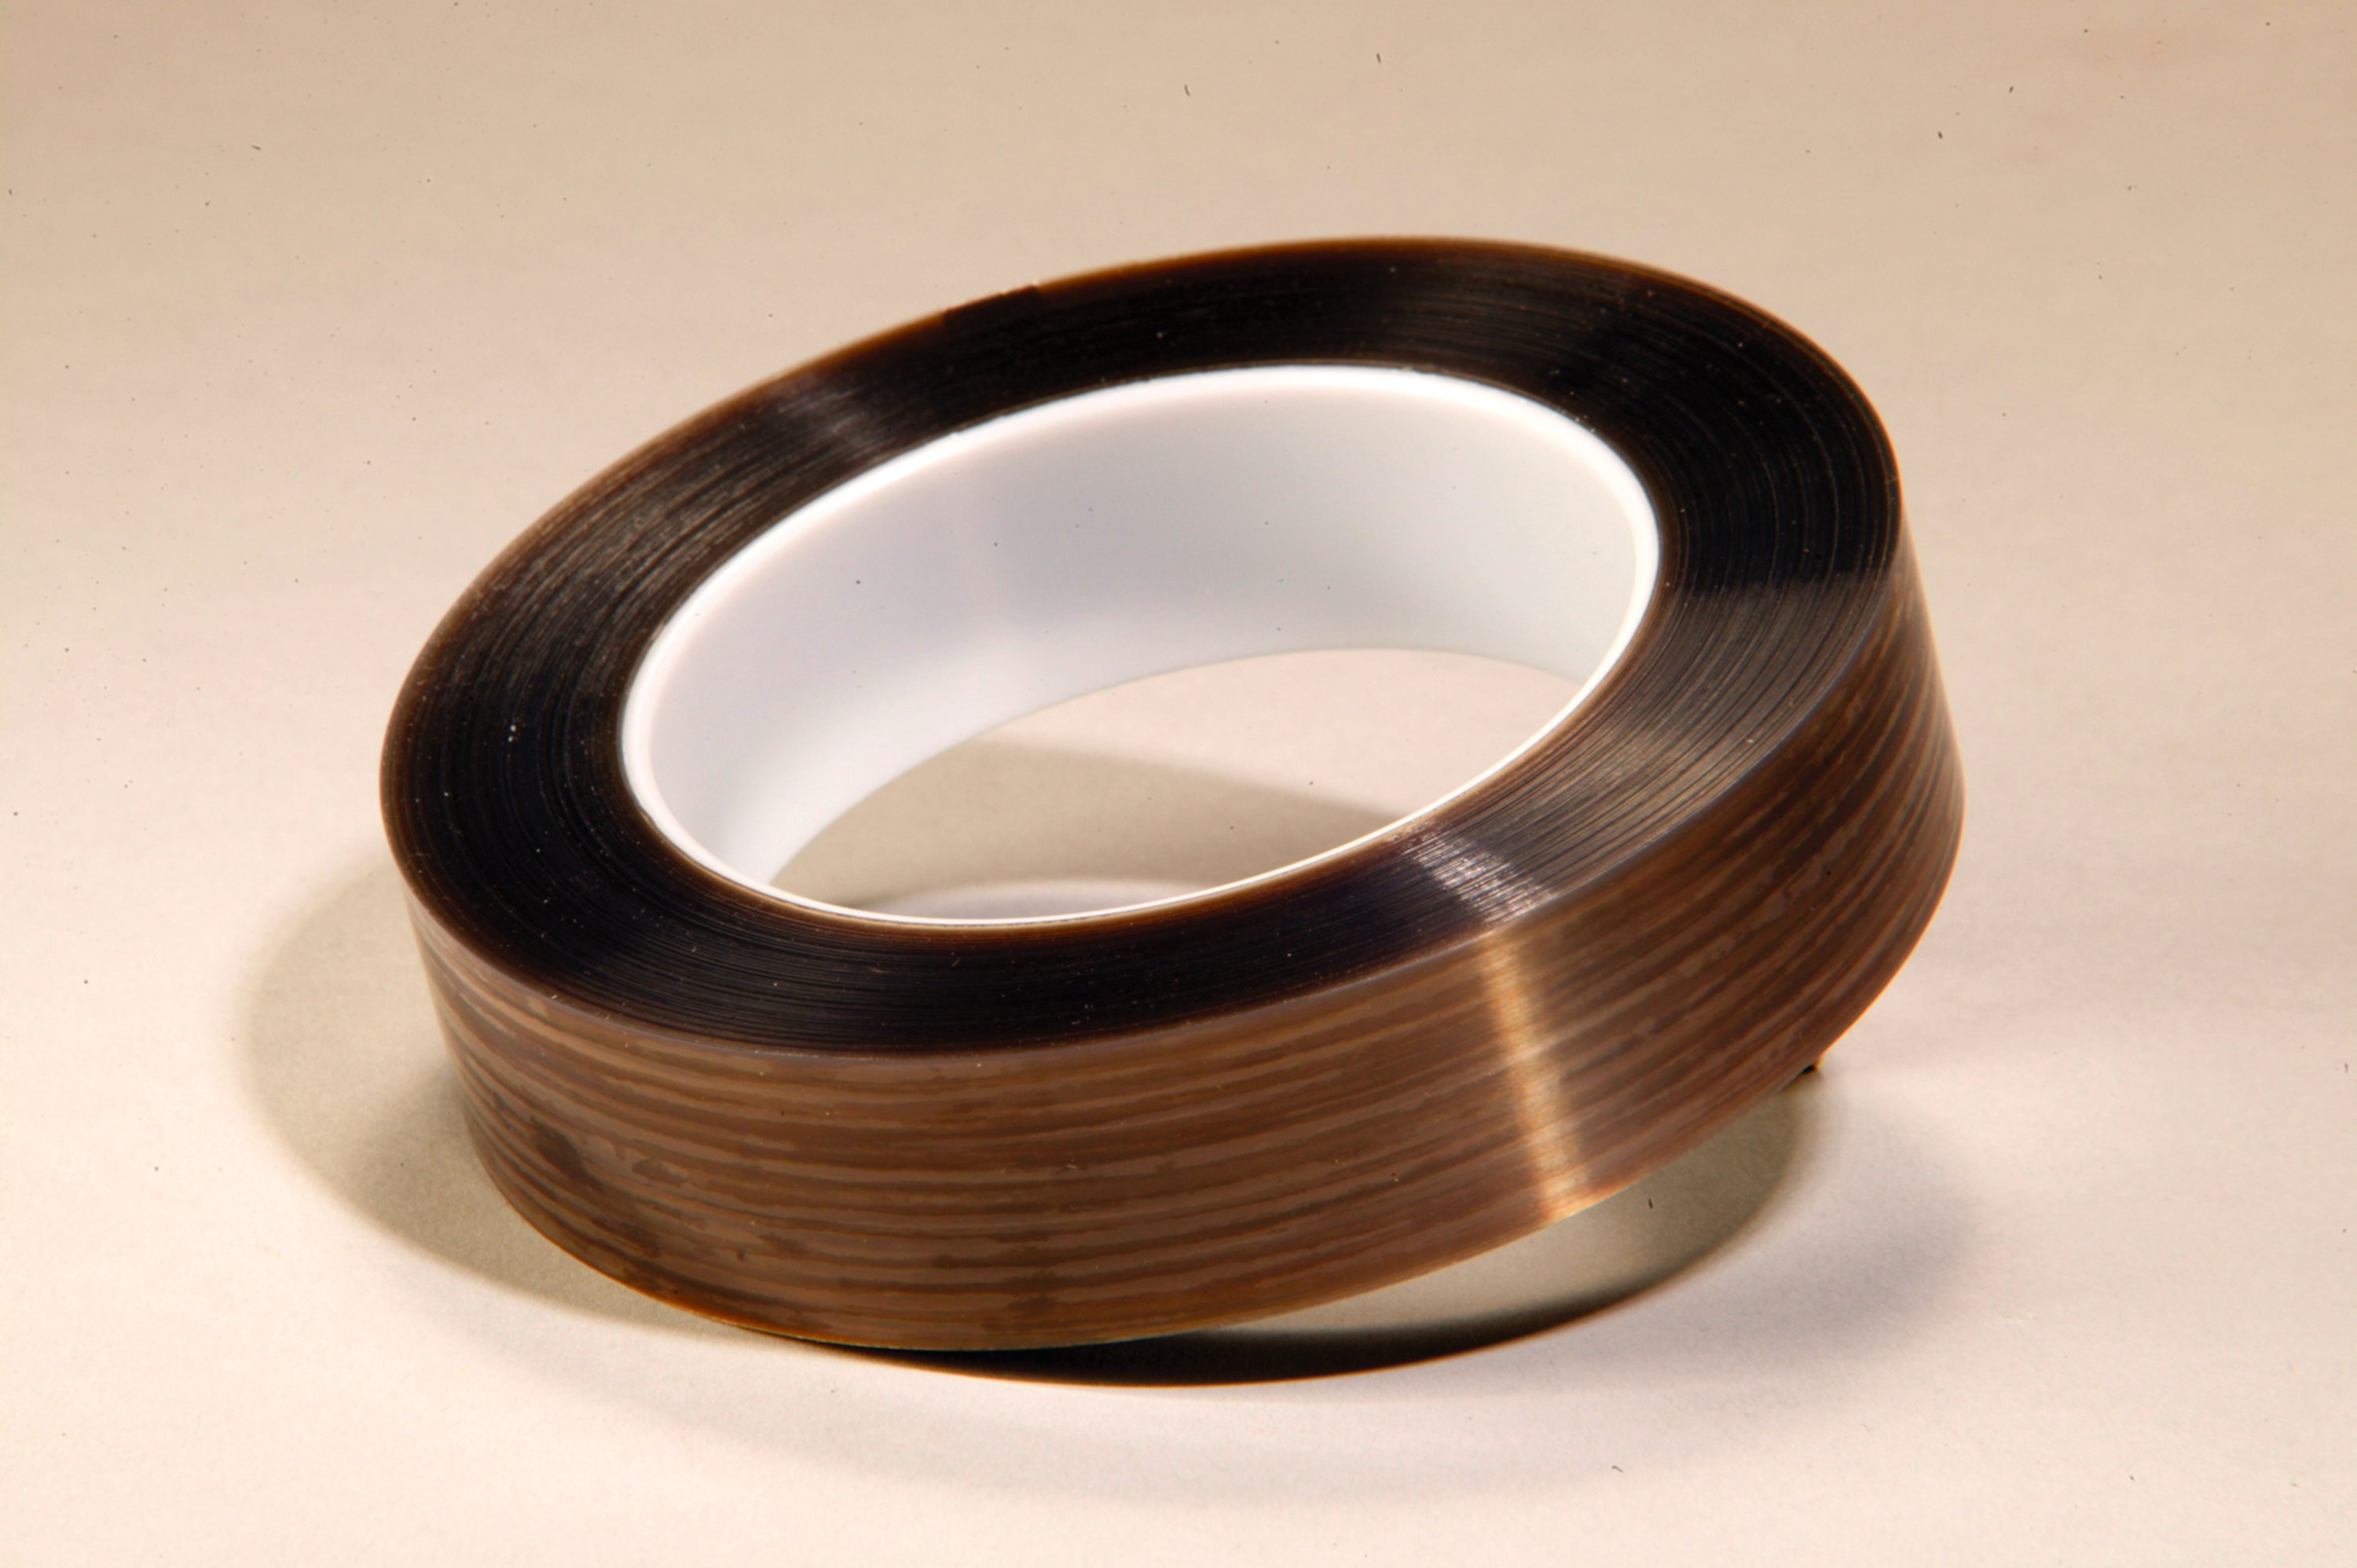 The extruded film backing resists curling when unwound from the roll and lies flatter than skived PTFE film tapes, creating a more uniform non-skid surface.